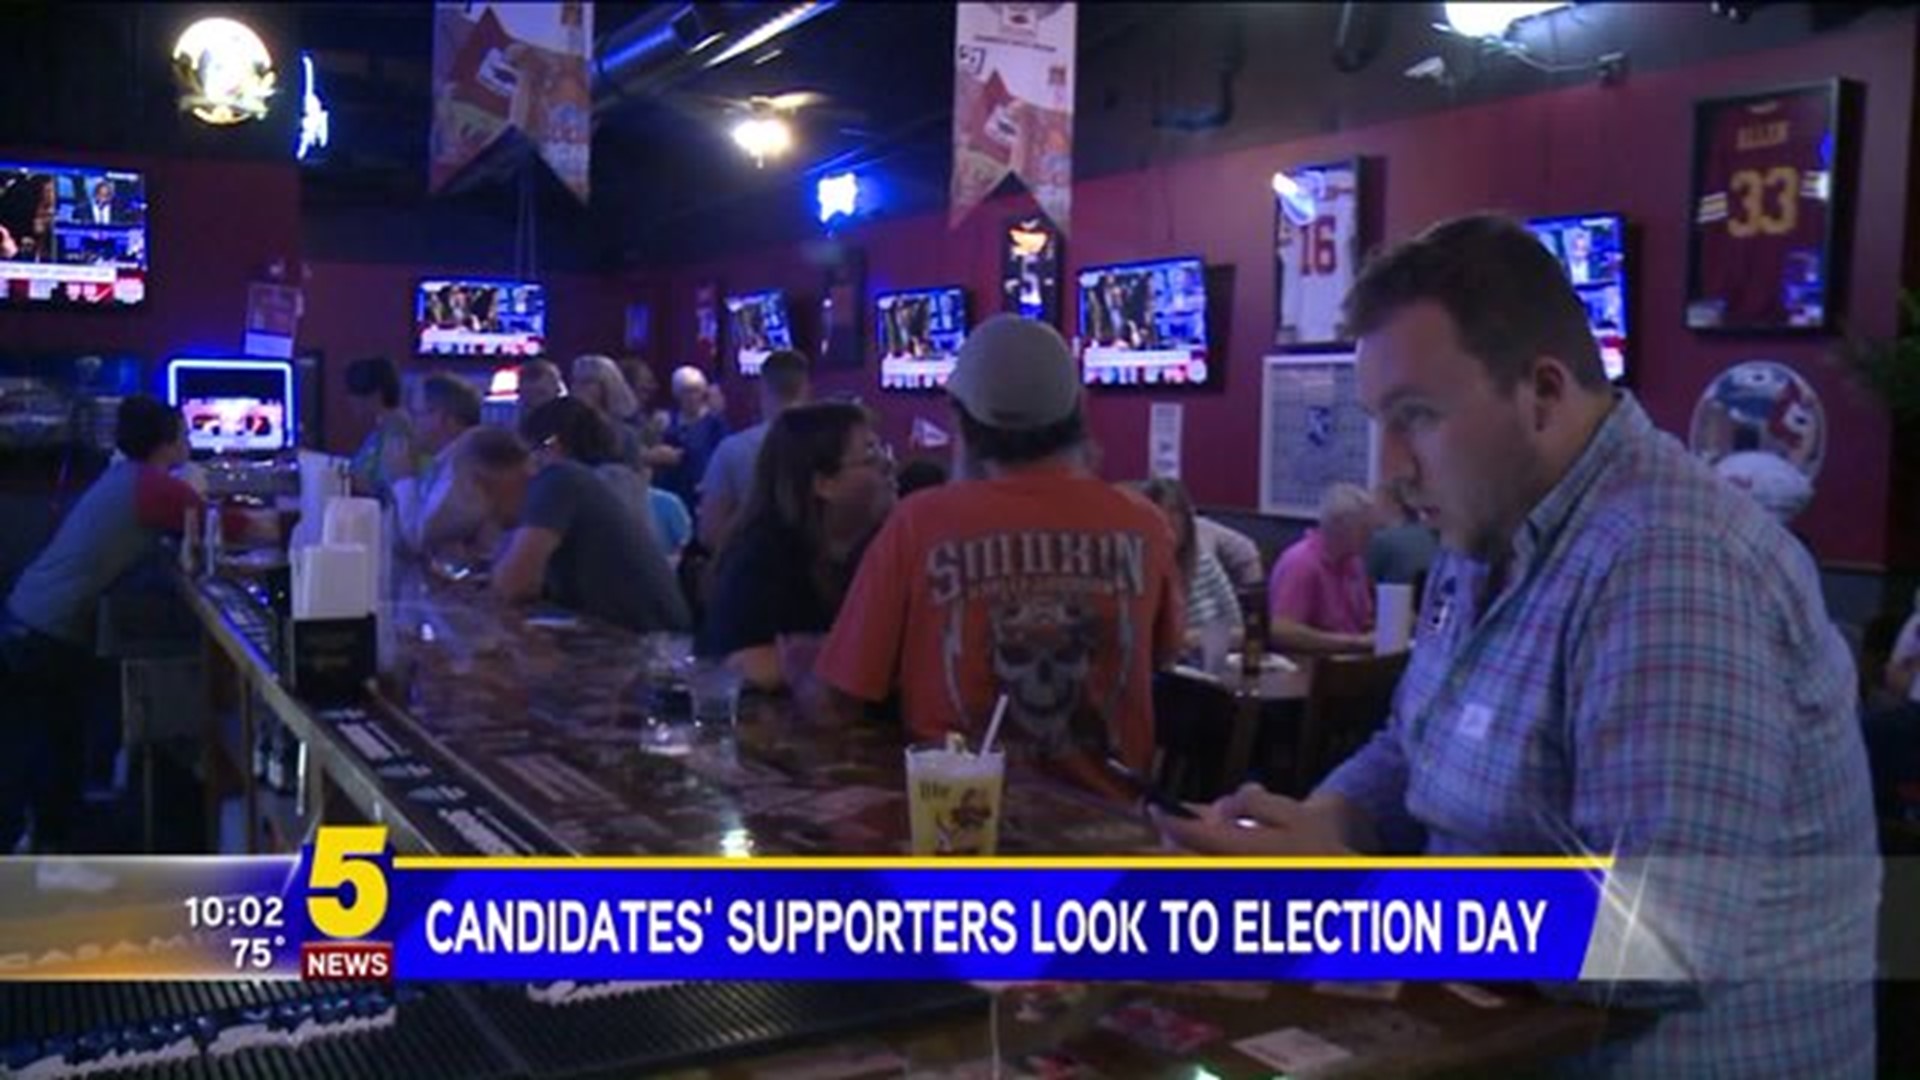 CLINTON, TRUMP SUPPORTERS TURN TO ELECTION DAY